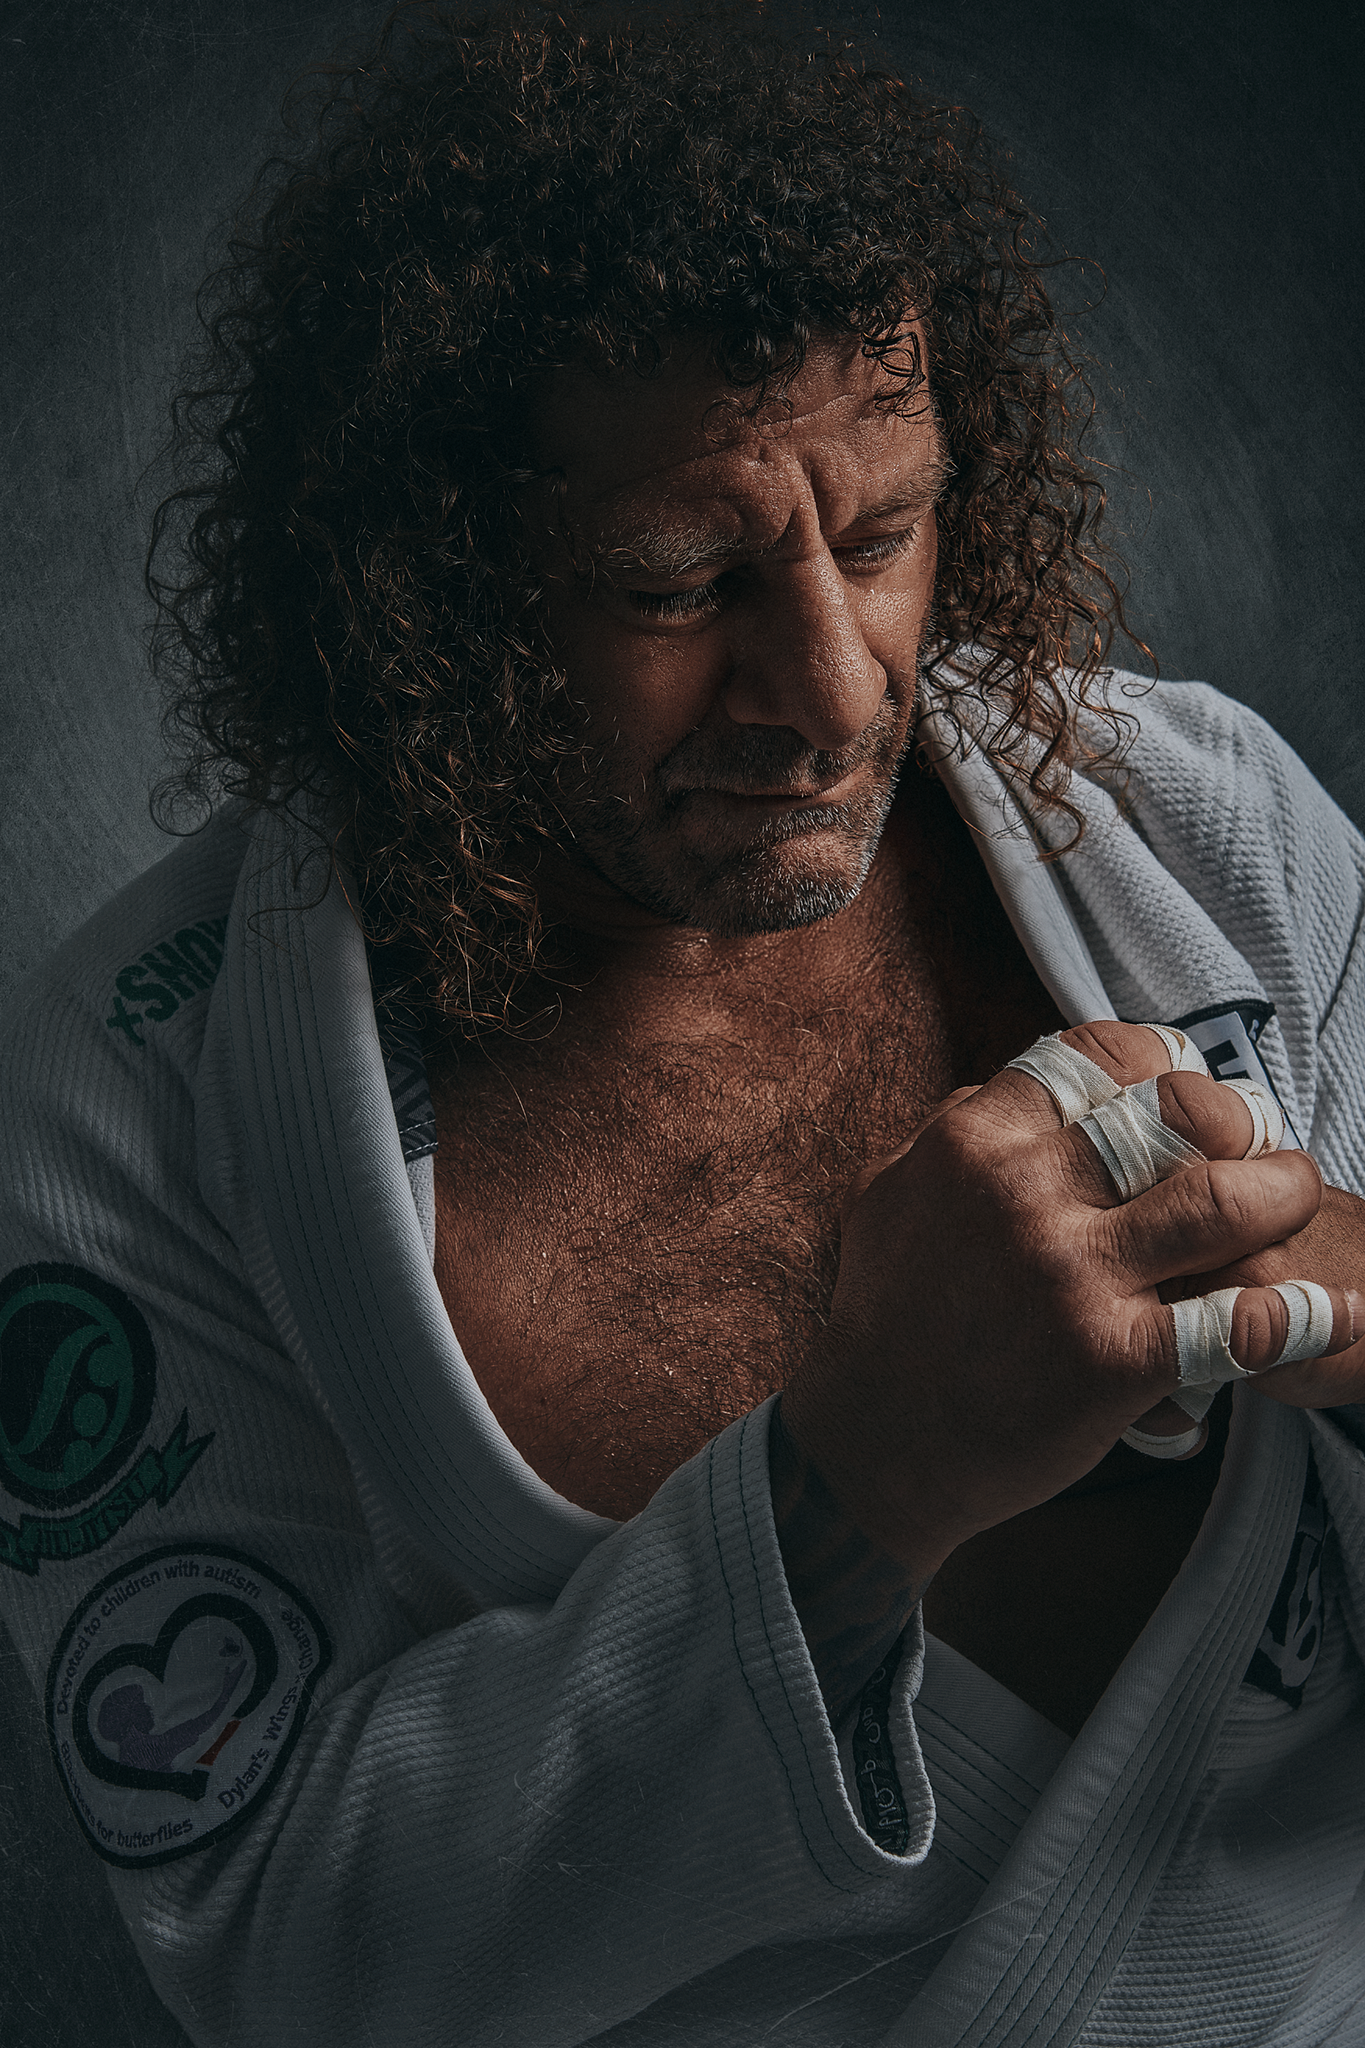 pensive portrait of professional male athlete kurt osiander with wrapped fingers taken in Cowra NSW